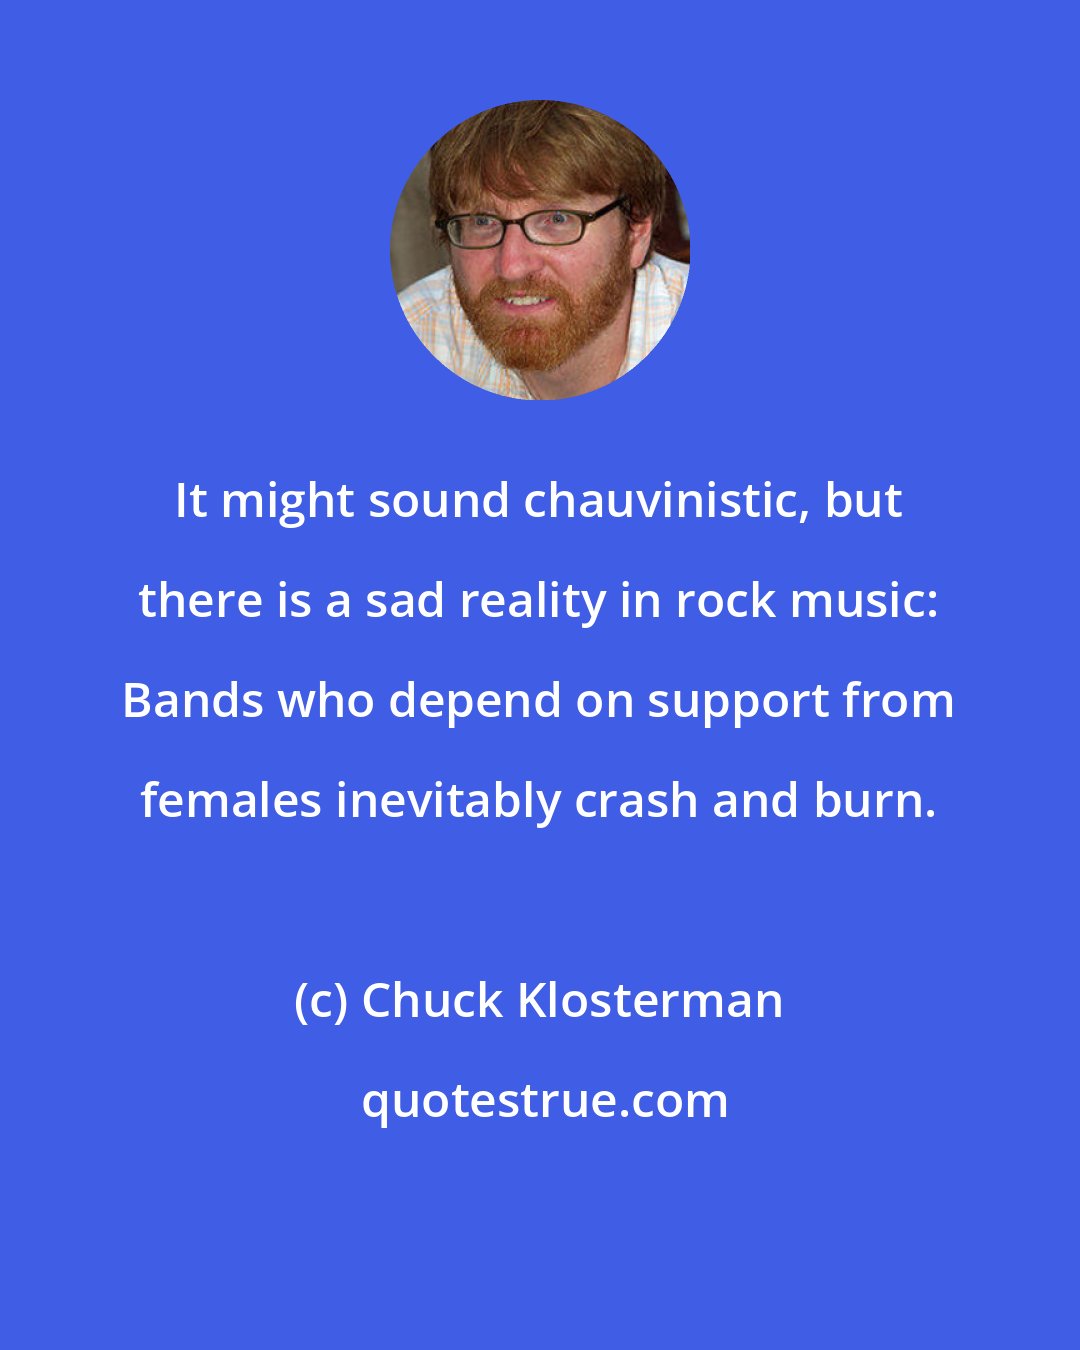 Chuck Klosterman: It might sound chauvinistic, but there is a sad reality in rock music: Bands who depend on support from females inevitably crash and burn.